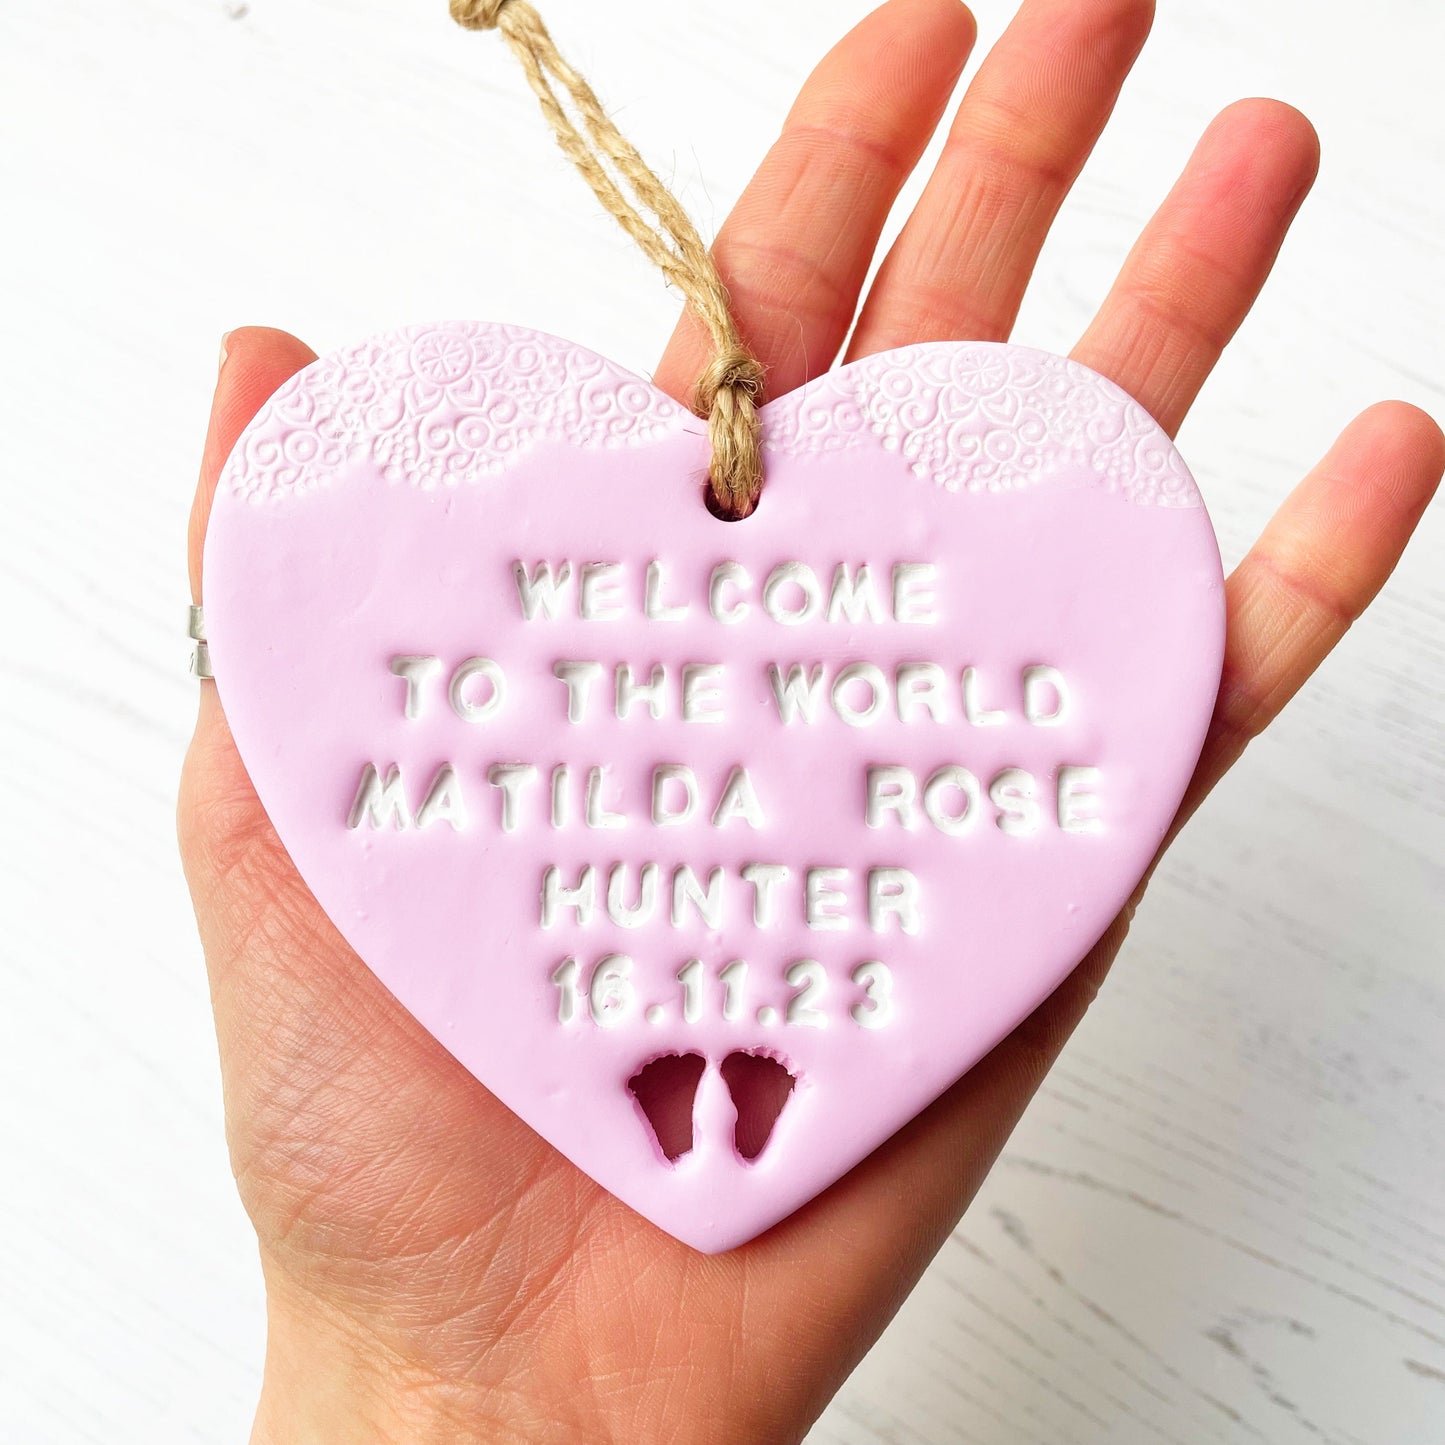 Personalised baby announcement heart sign, in pink clay hanging heart with a white writing and baby feet cut out at the bottom of the heart, the heart is personalised with WELCOME TO THE WORLD BABY MATILDA ROSE HUNTER 16.11.23